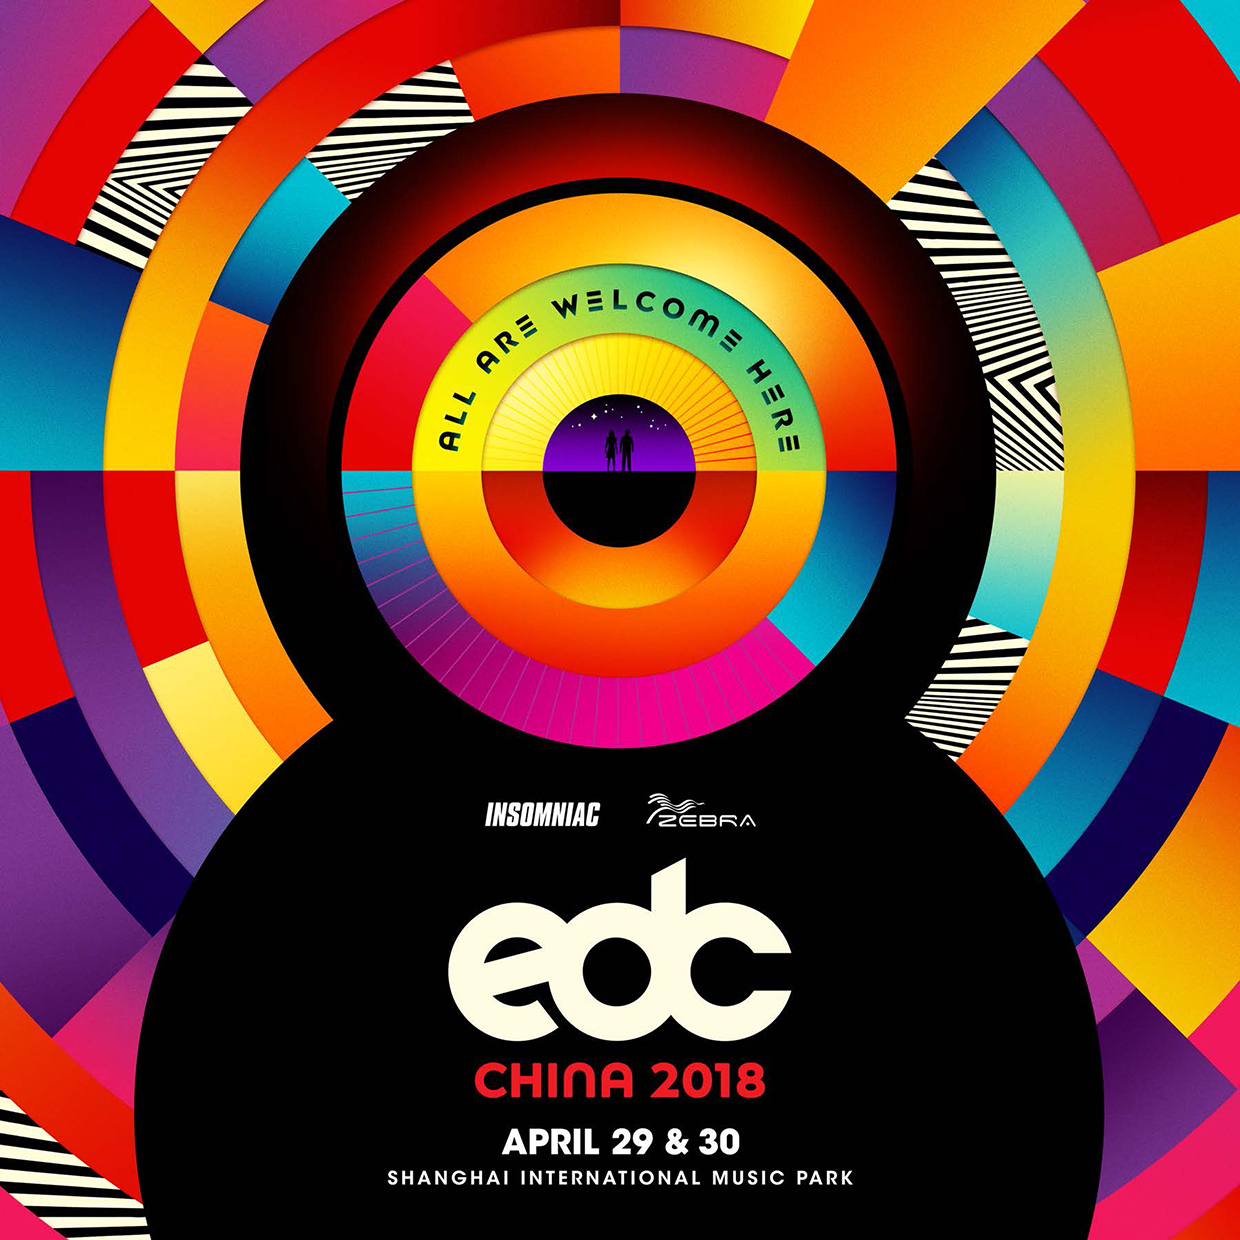 EDC China 2018 teaser - all are welcome here